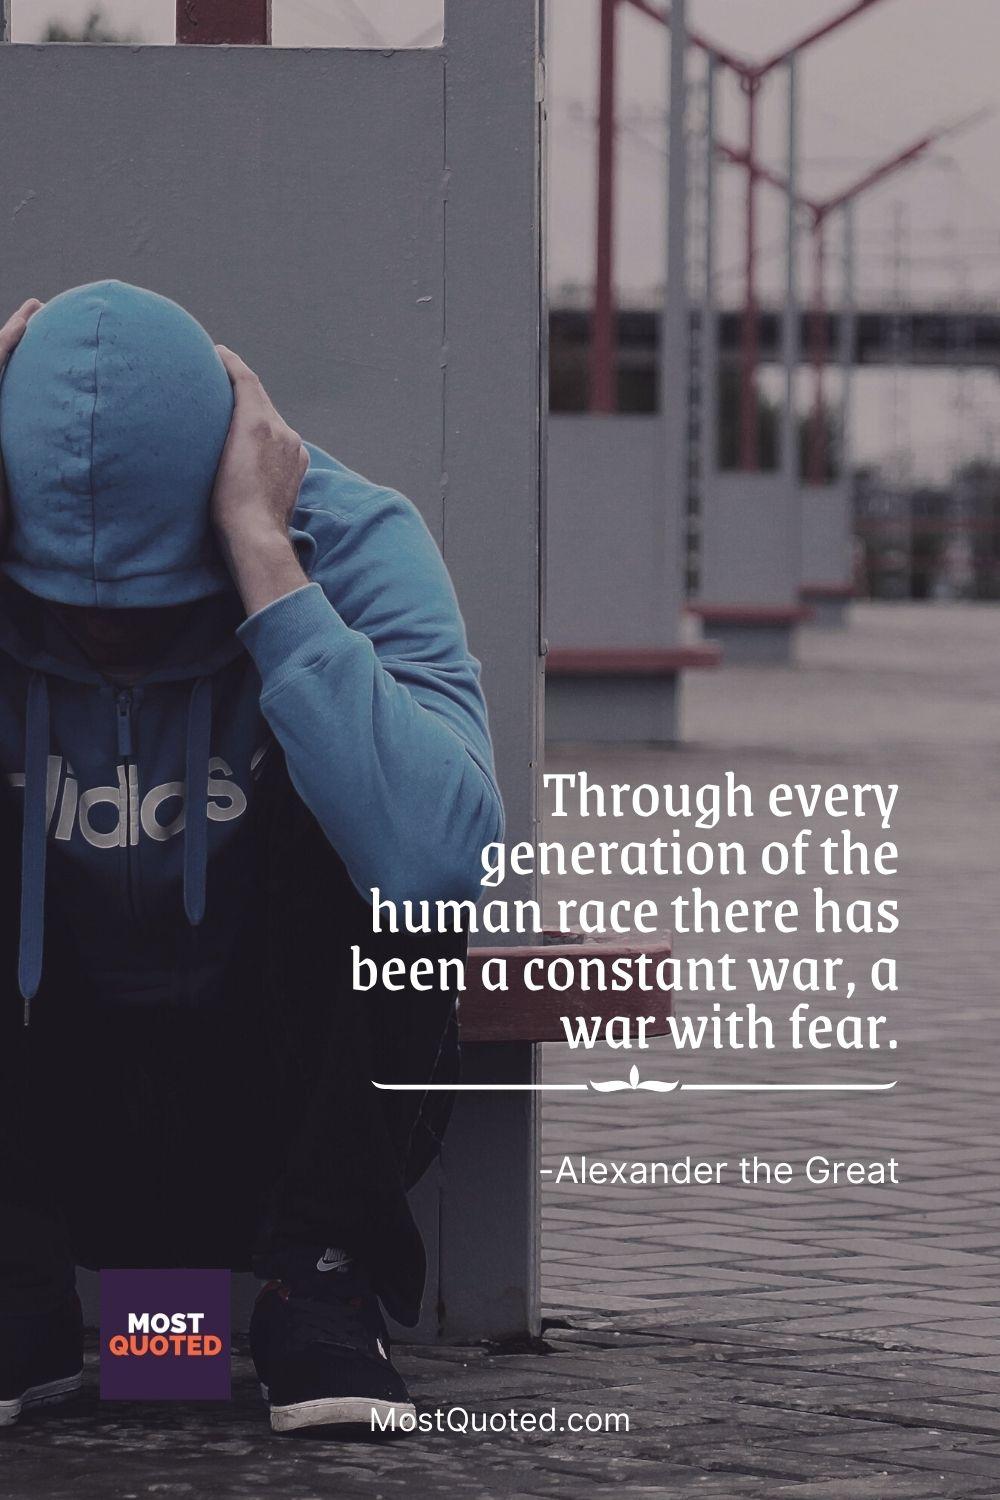 Through every generation of the human race there has been a constant war, a war with fear. - Alexander the Great